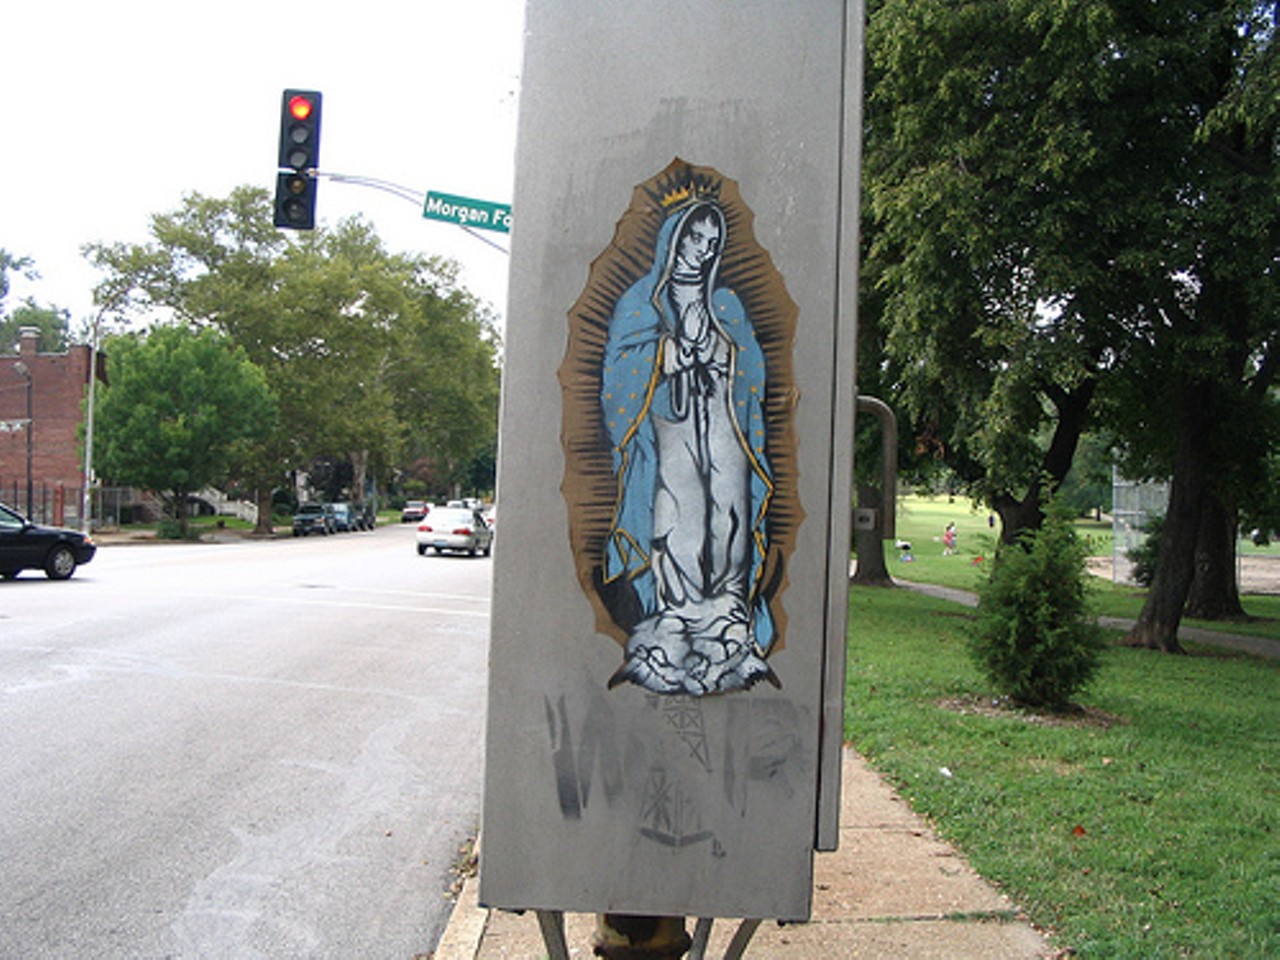 "Our Lady of Tower Grove" at Morgan Ford Road and Arsenal Street. Read State of Street Art: Vandalism or legit, it's not going away by Keegan Hamilton.